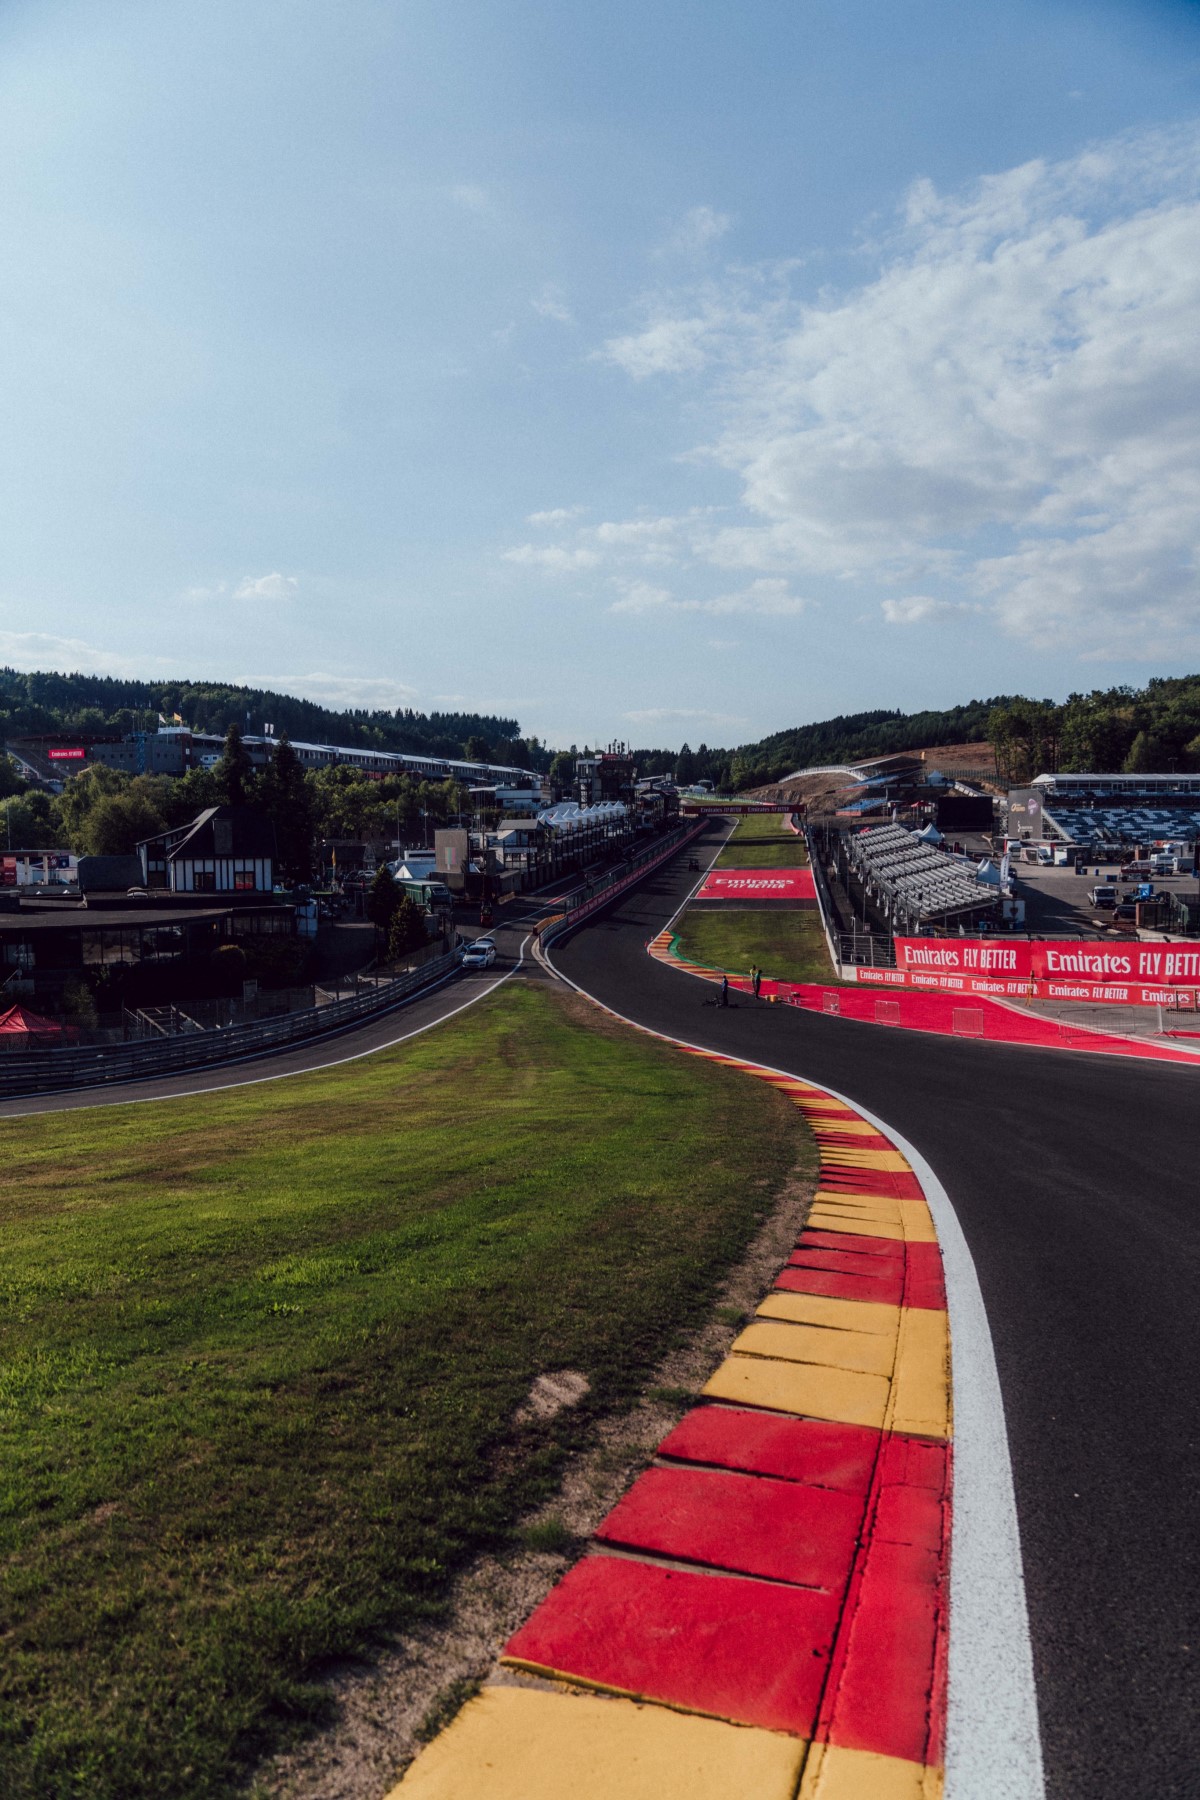 Looking back from Eau Rouge